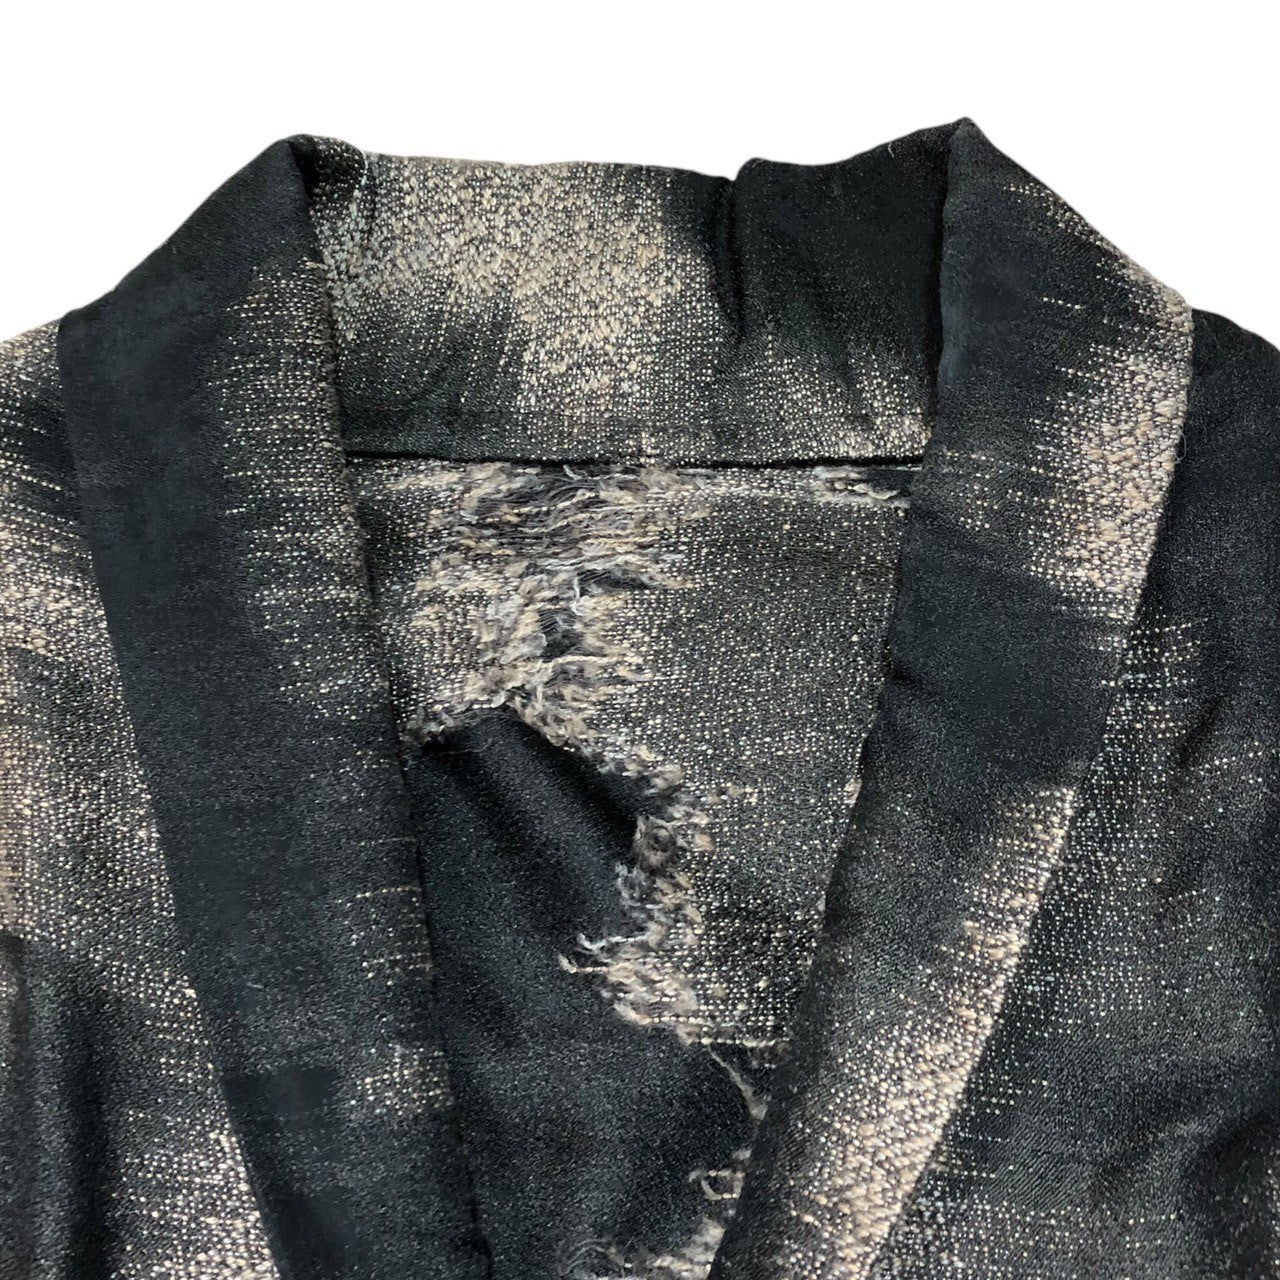 Haat ISSEY MIYAKE(ハートイッセイミヤケ) Old all-over pattern ...